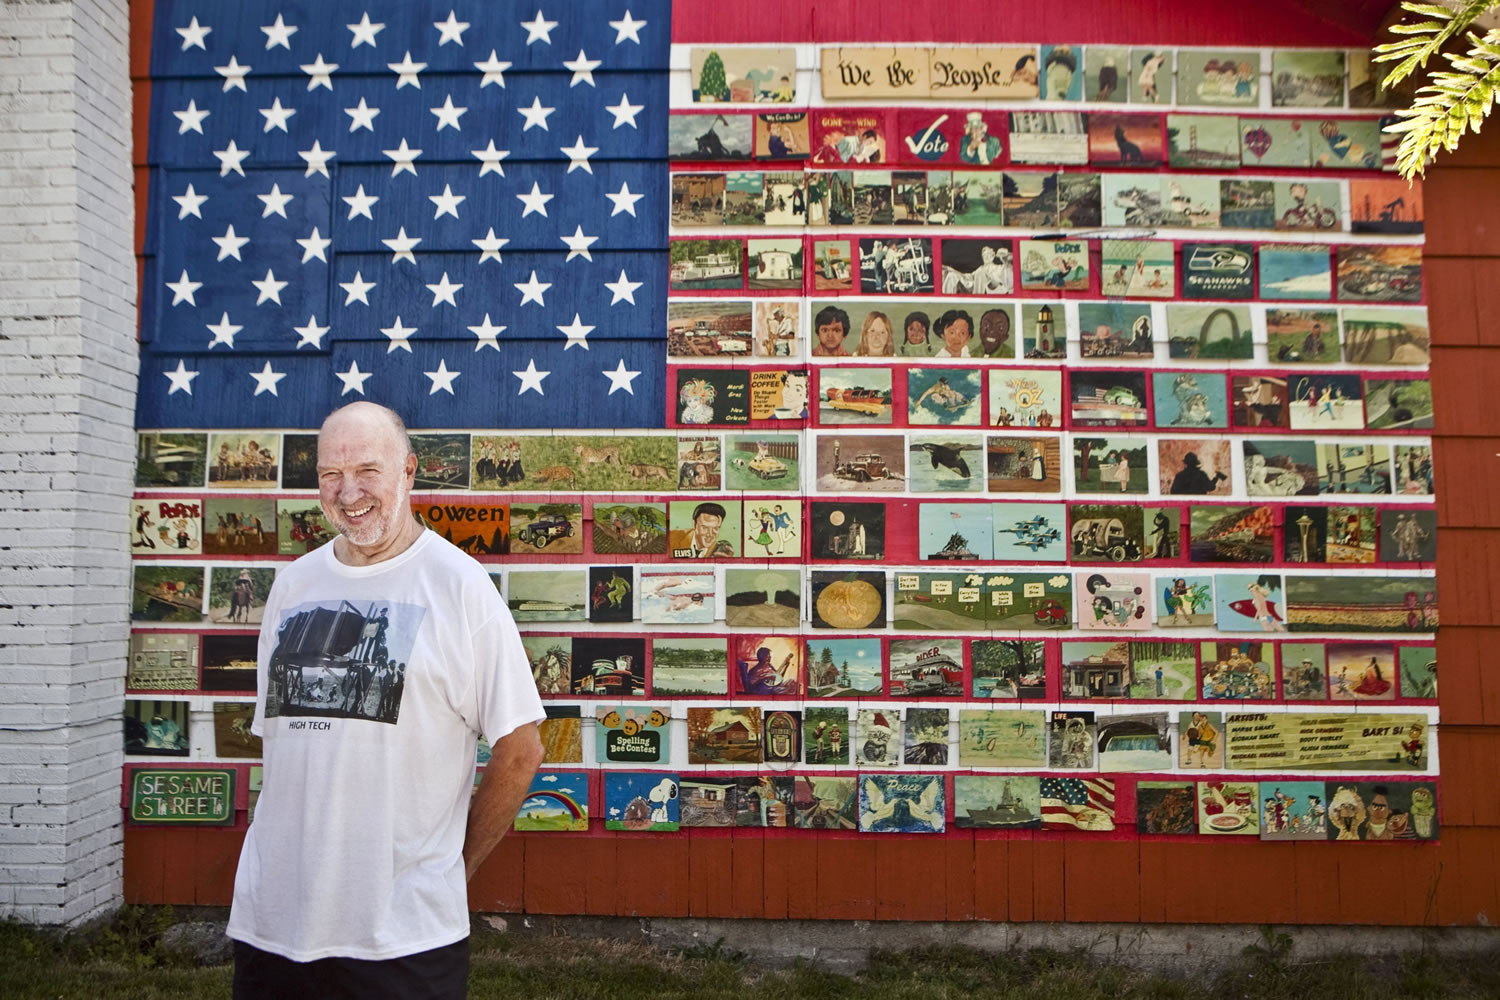 Rich Ormbrek turned the outside of his Seattle home into a collaborative Americana art project after 9/11.